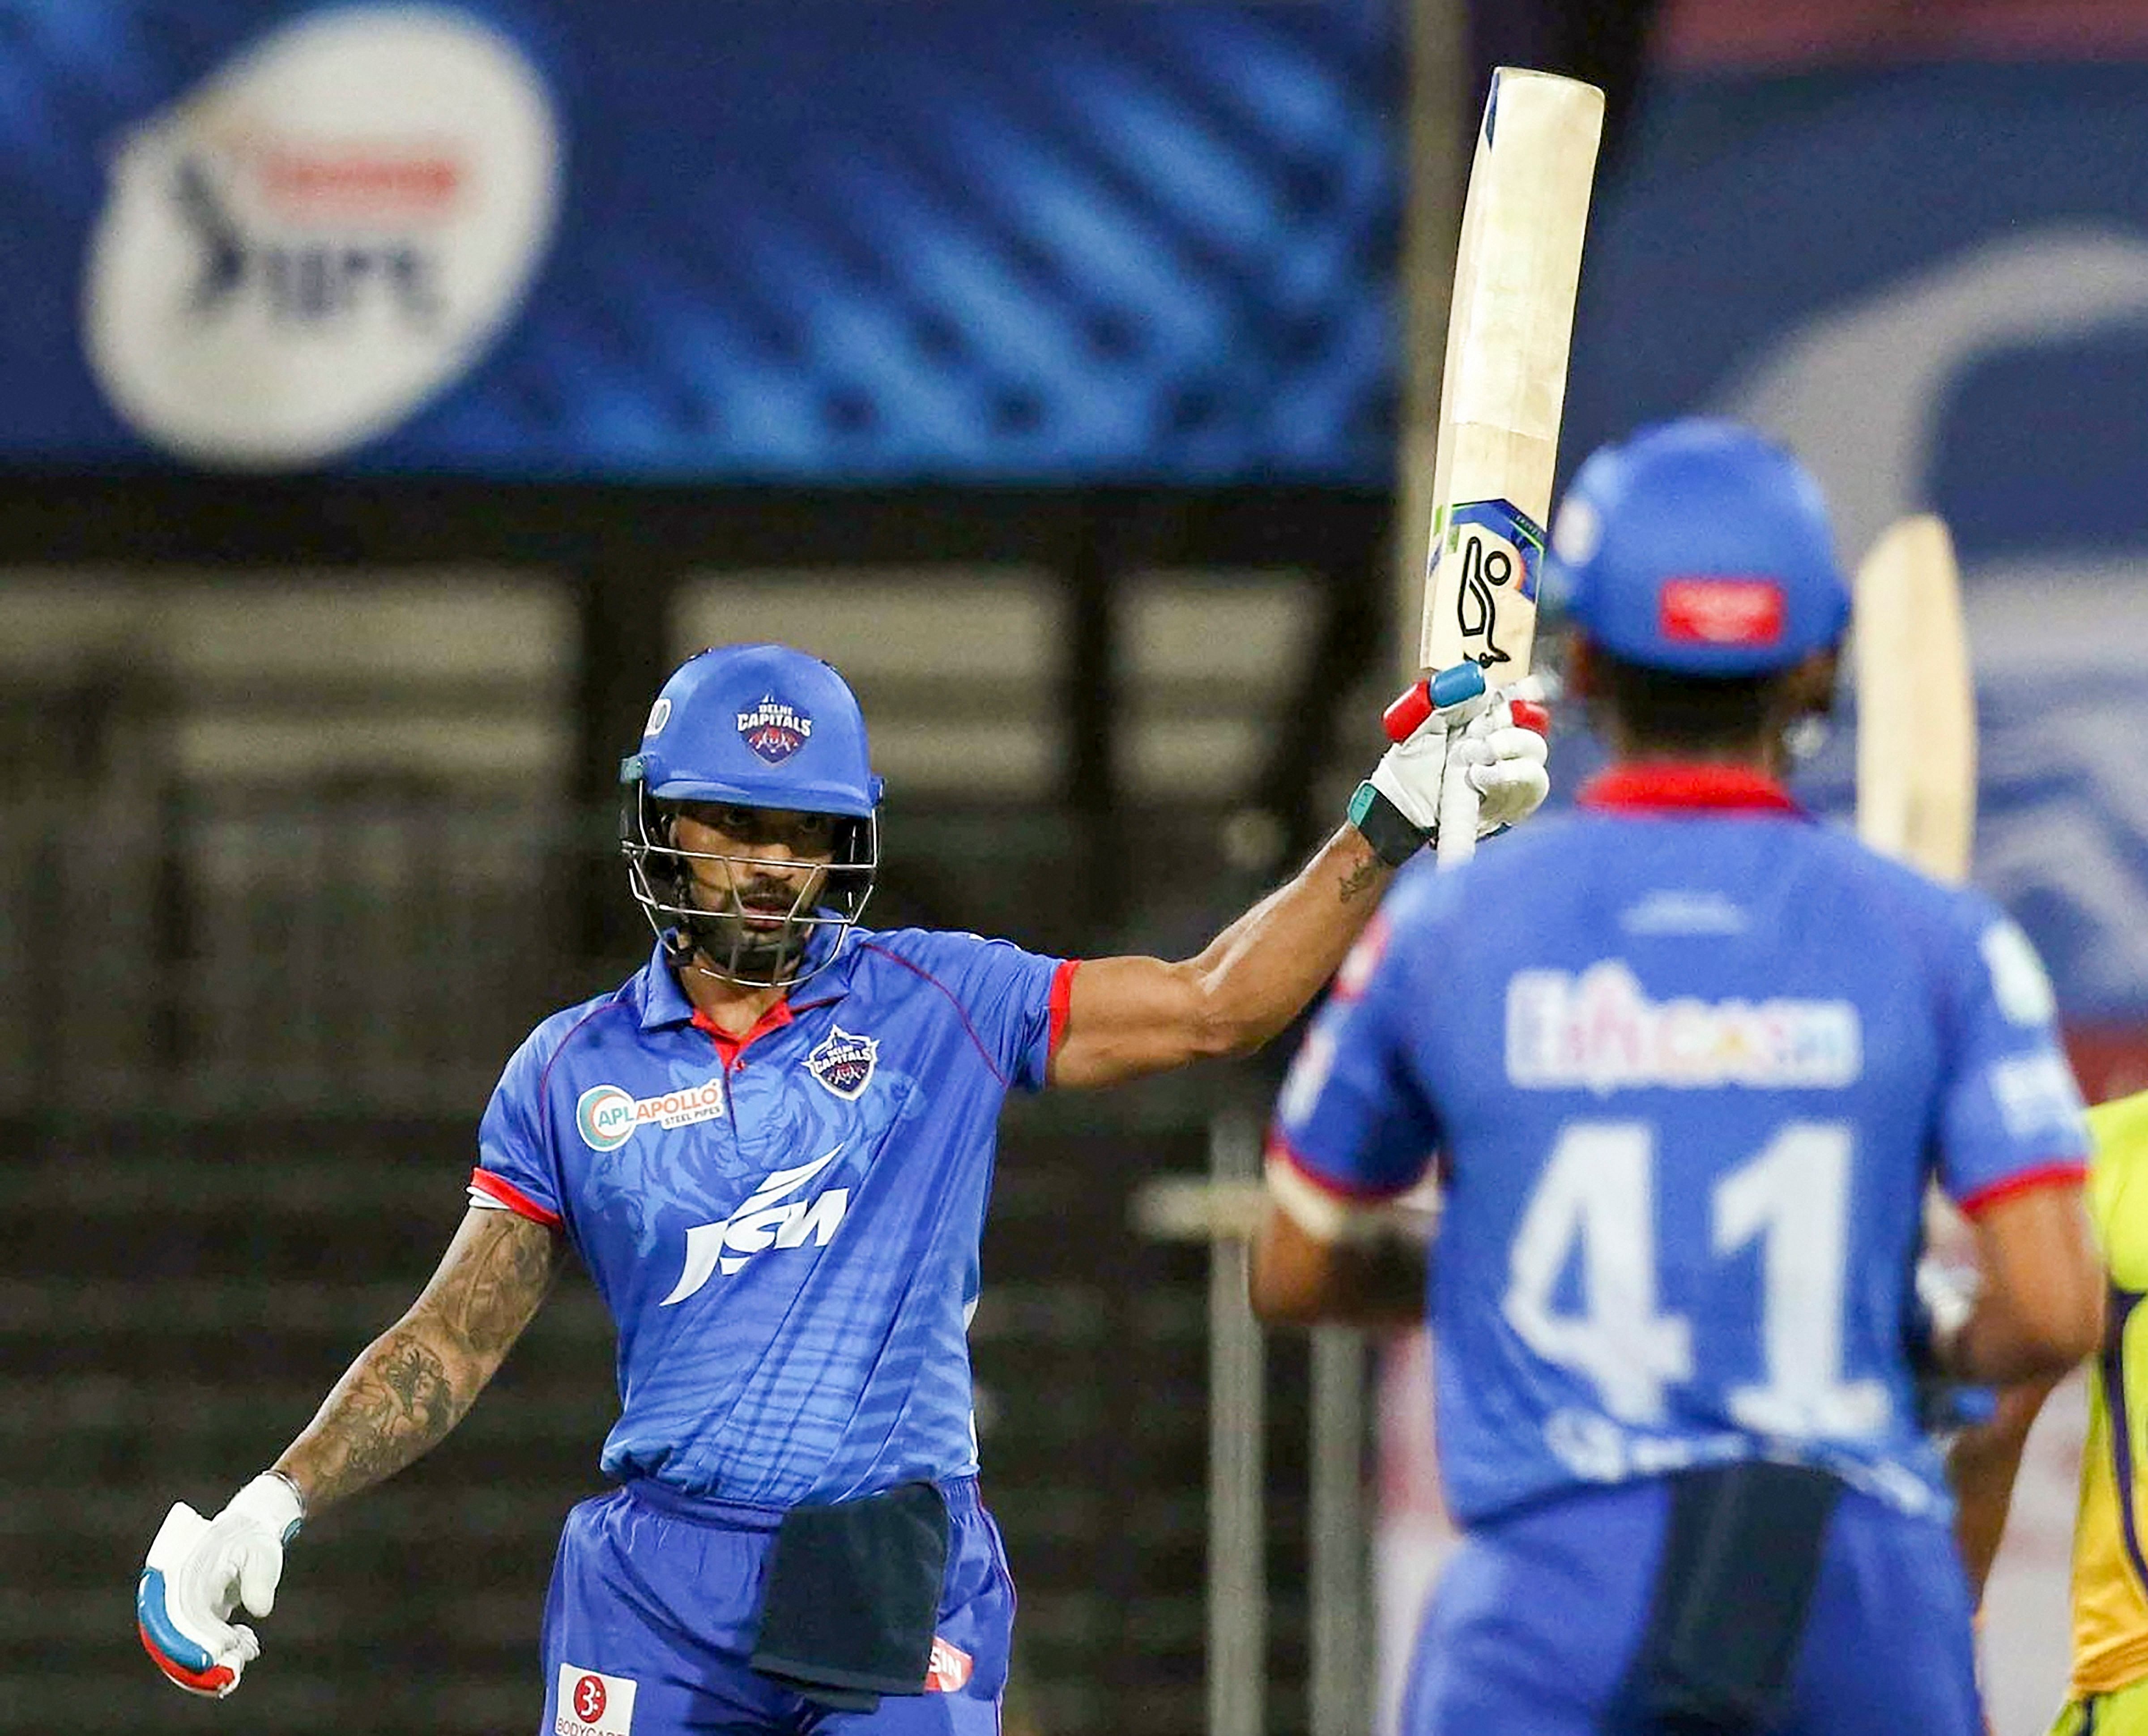  Delhi Capitals (DC) player Shikhar Dhawan celebrates after scoring a half century during their Indian Premier League (IPL) T20 cricket match against Chennai Super Kings (CSK), at the Sharjah Cricket Stadium in Sharjah, Saturday, Oct. 17, 2020. Credit: PTI Photo